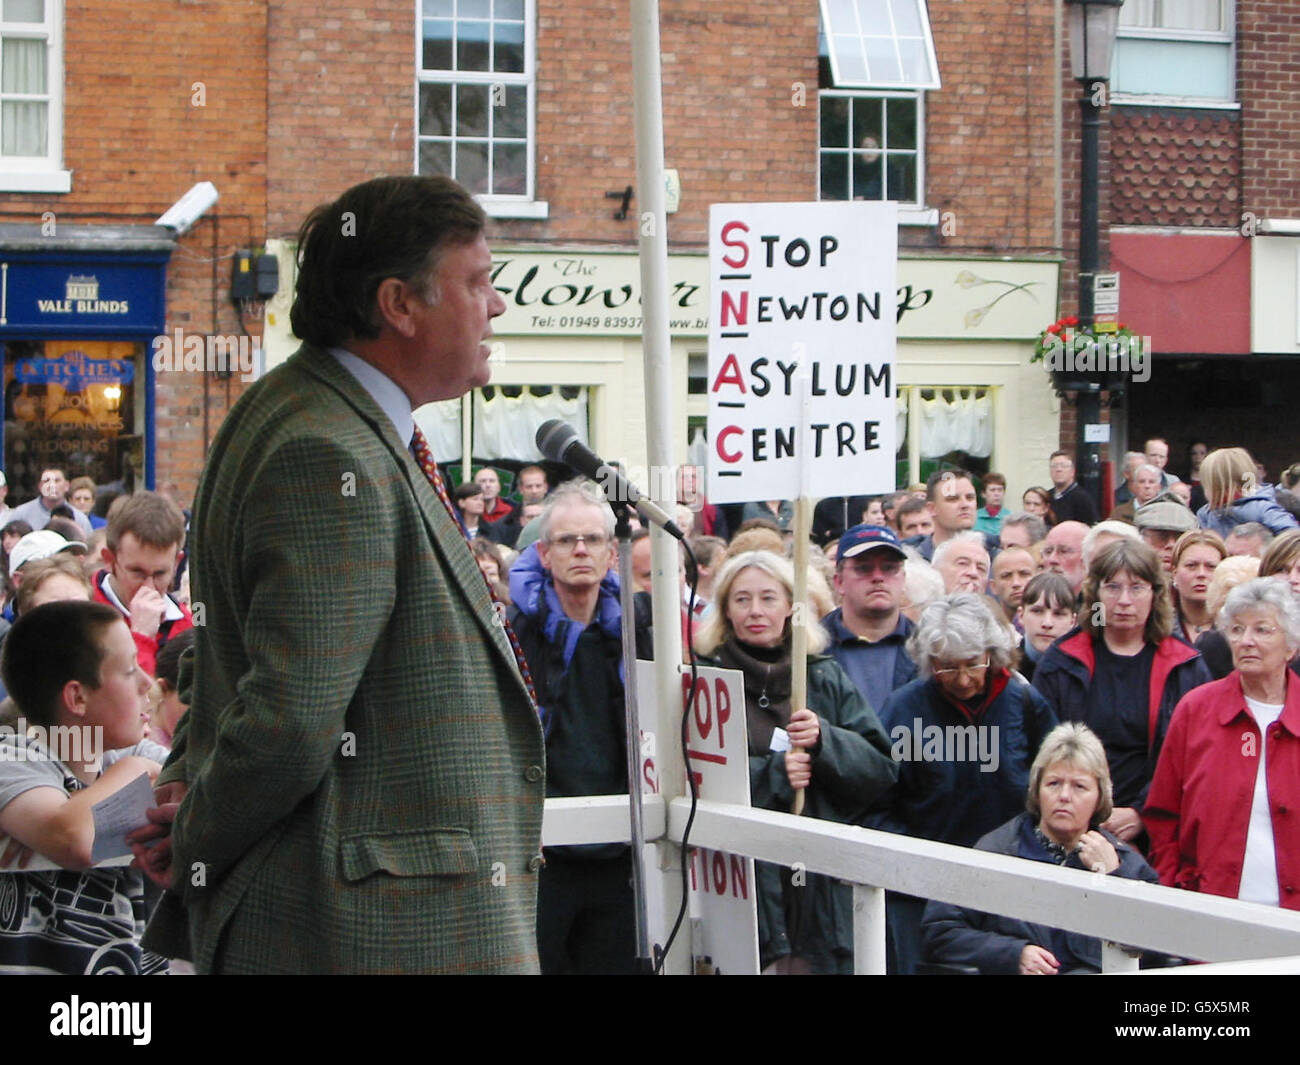 Local conservative MP Ken Clarke, addresses more than 1,500 people gather in the small market town of Bingham in Nottinghamshire to protest at plans to build a refugee centre nearby. The largest gathering Bingham has seen in more than four years, according to local police, saw residents from outlying villages gather to demonstrate against the Government plan to convert a former RAF base at Newton into an asylum seekers' camp. Stock Photo